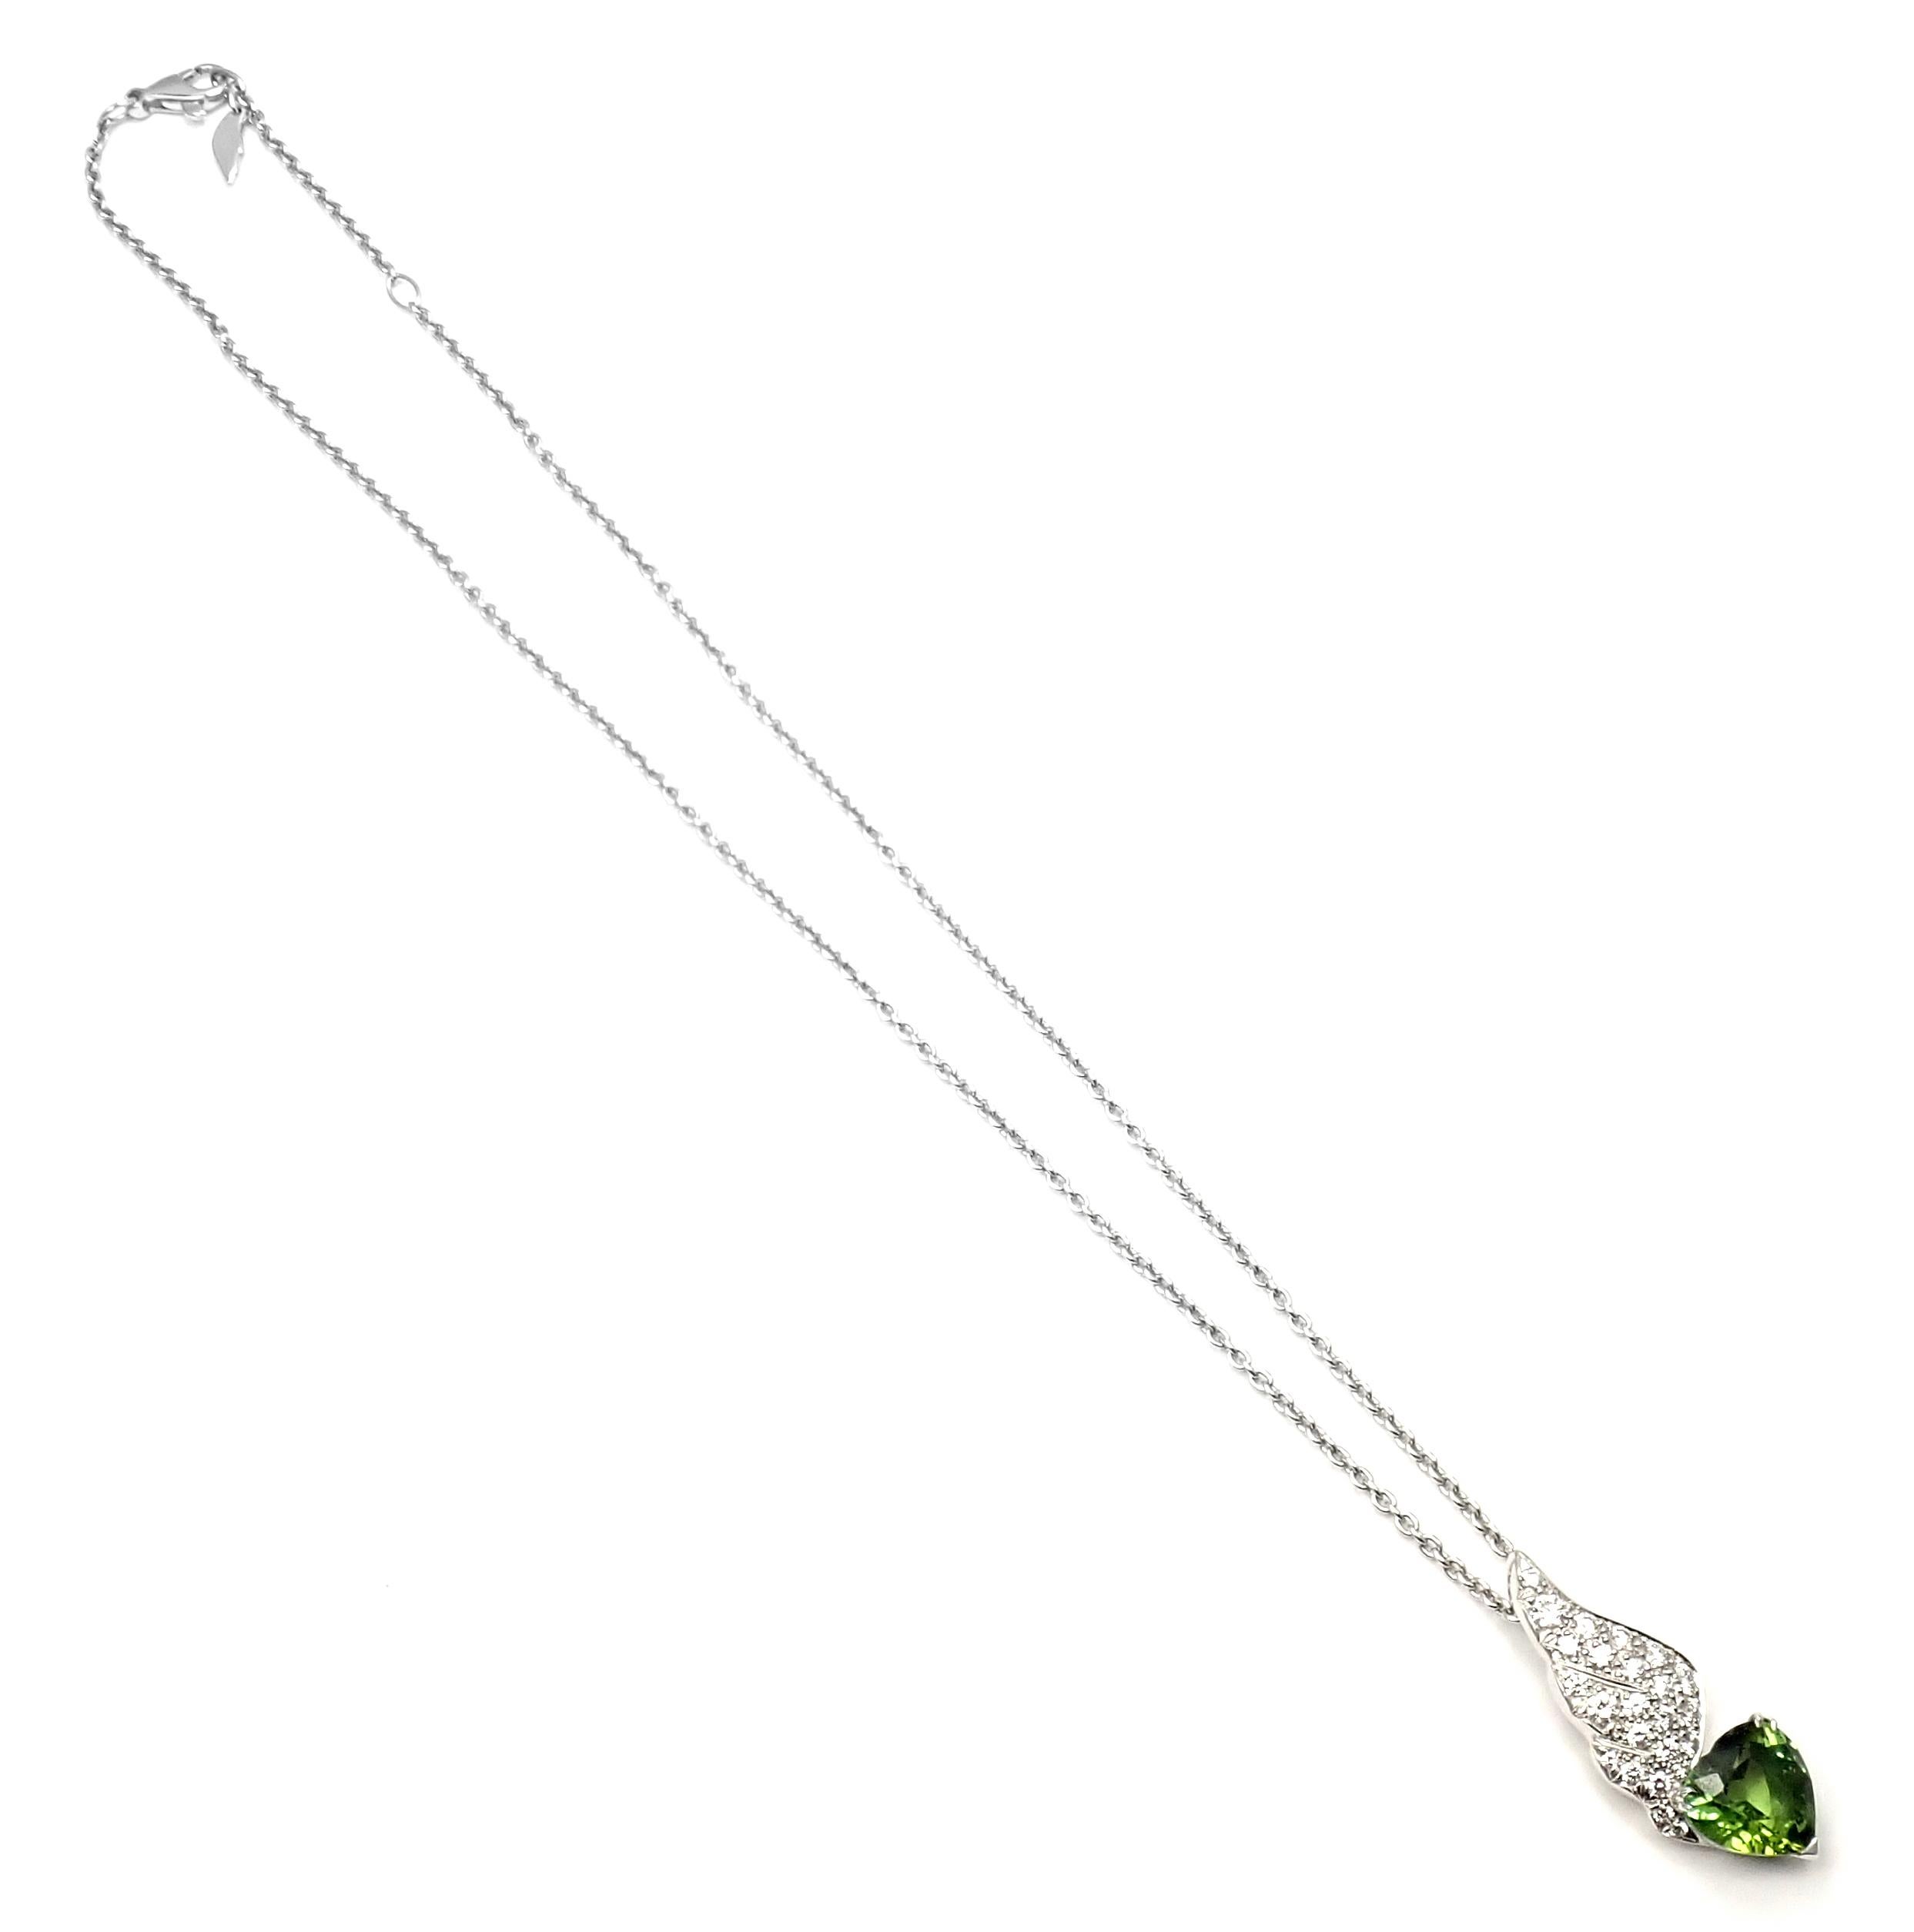 Piaget Diamond Peridot Heart White Gold Pendant Necklace In Excellent Condition For Sale In Holland, PA